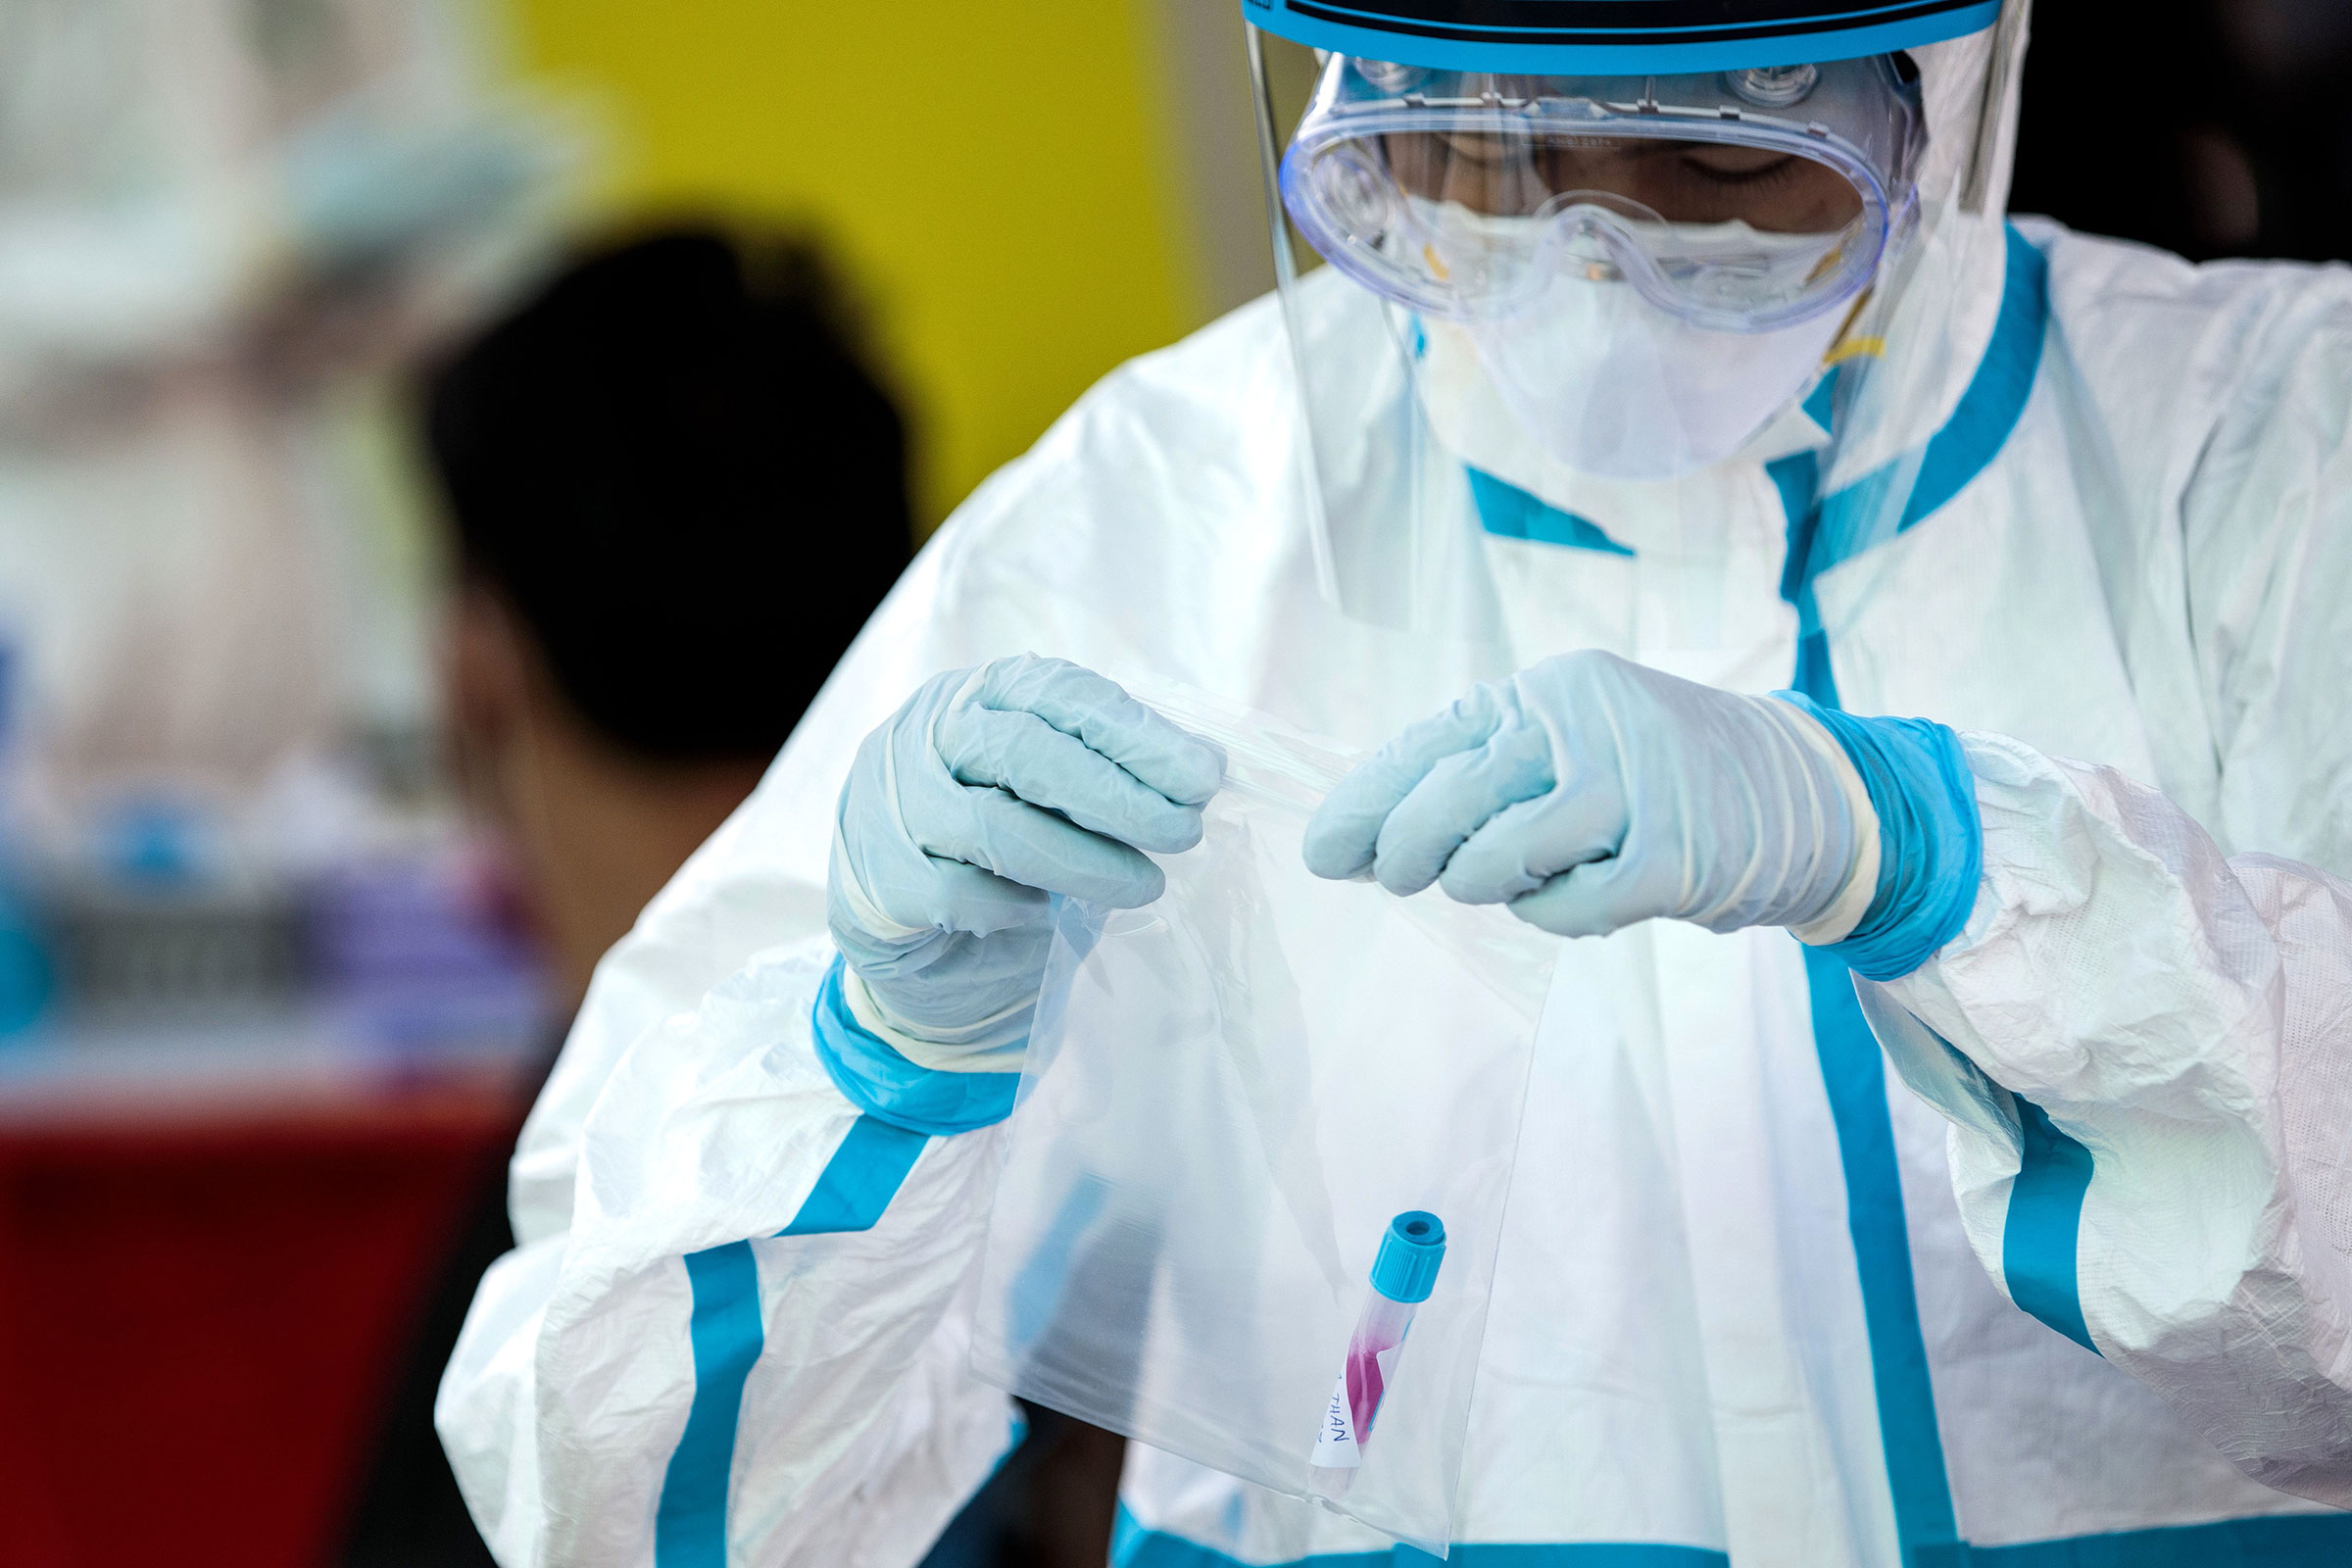 A medical official bags a swab sample to test for Covid-19 on December 19, 2020 in Samut Sakhon, Thailand.